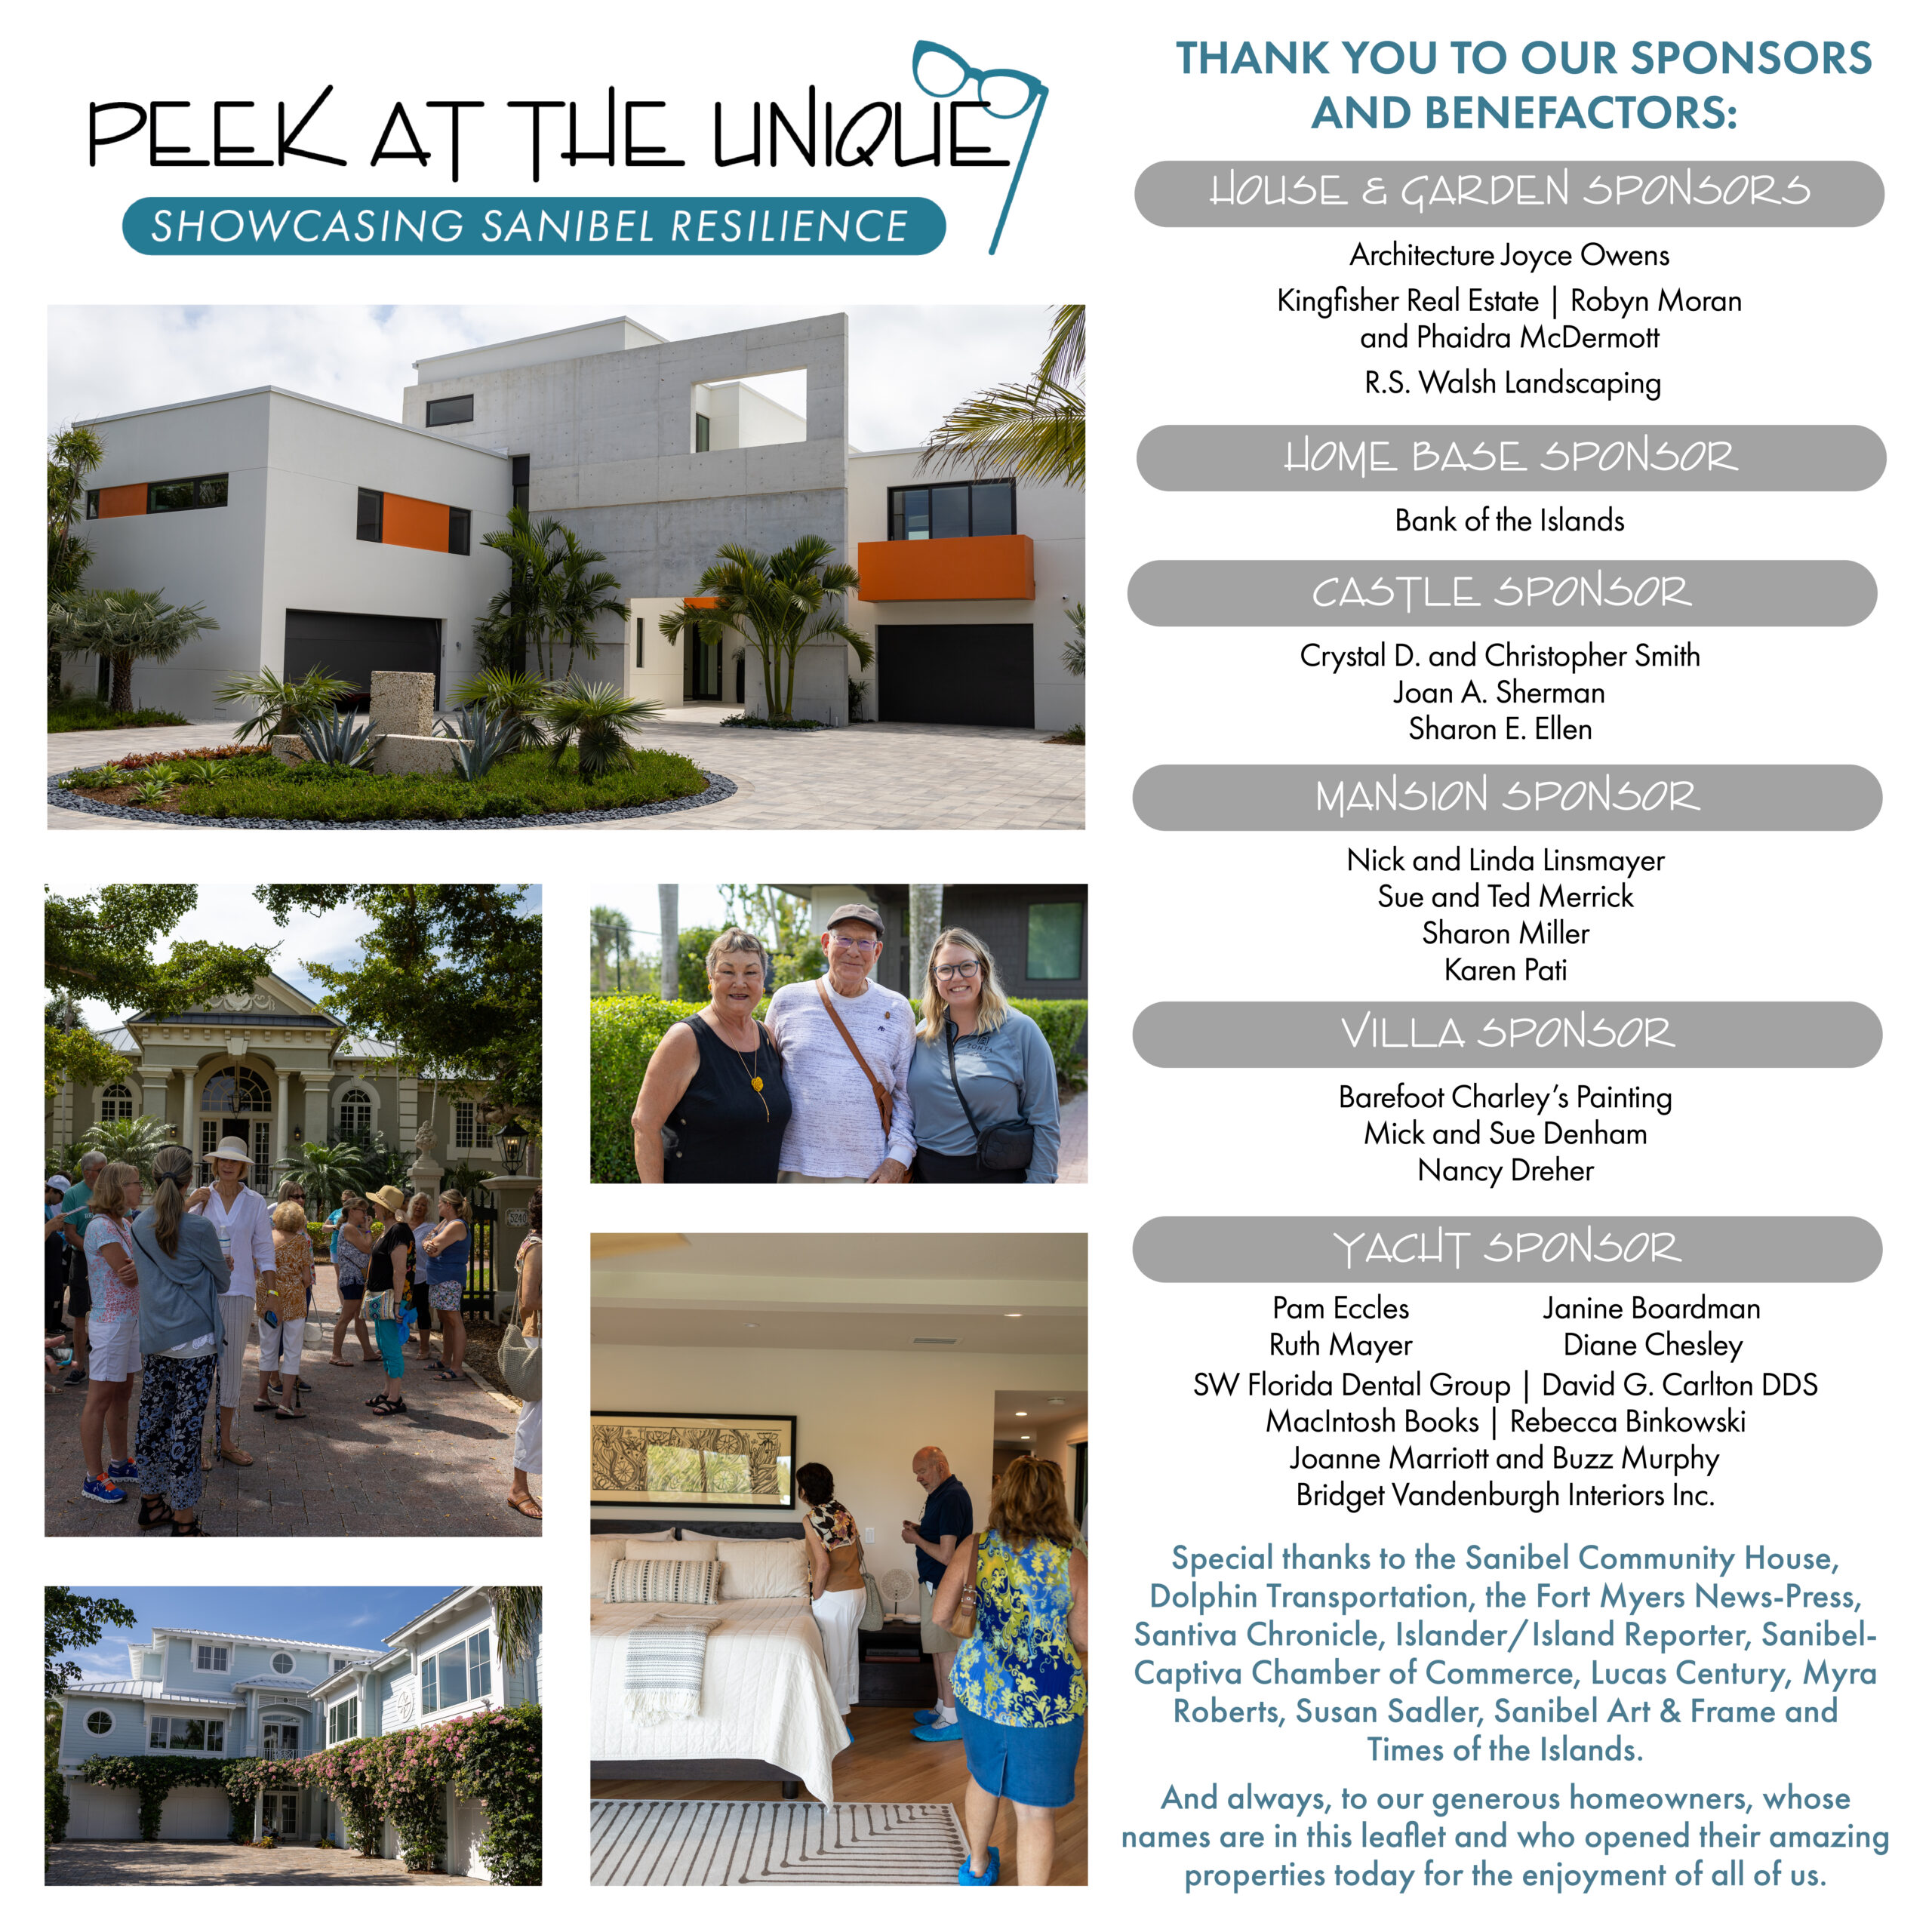 Thank You to Sponsors - Peek at the Unique